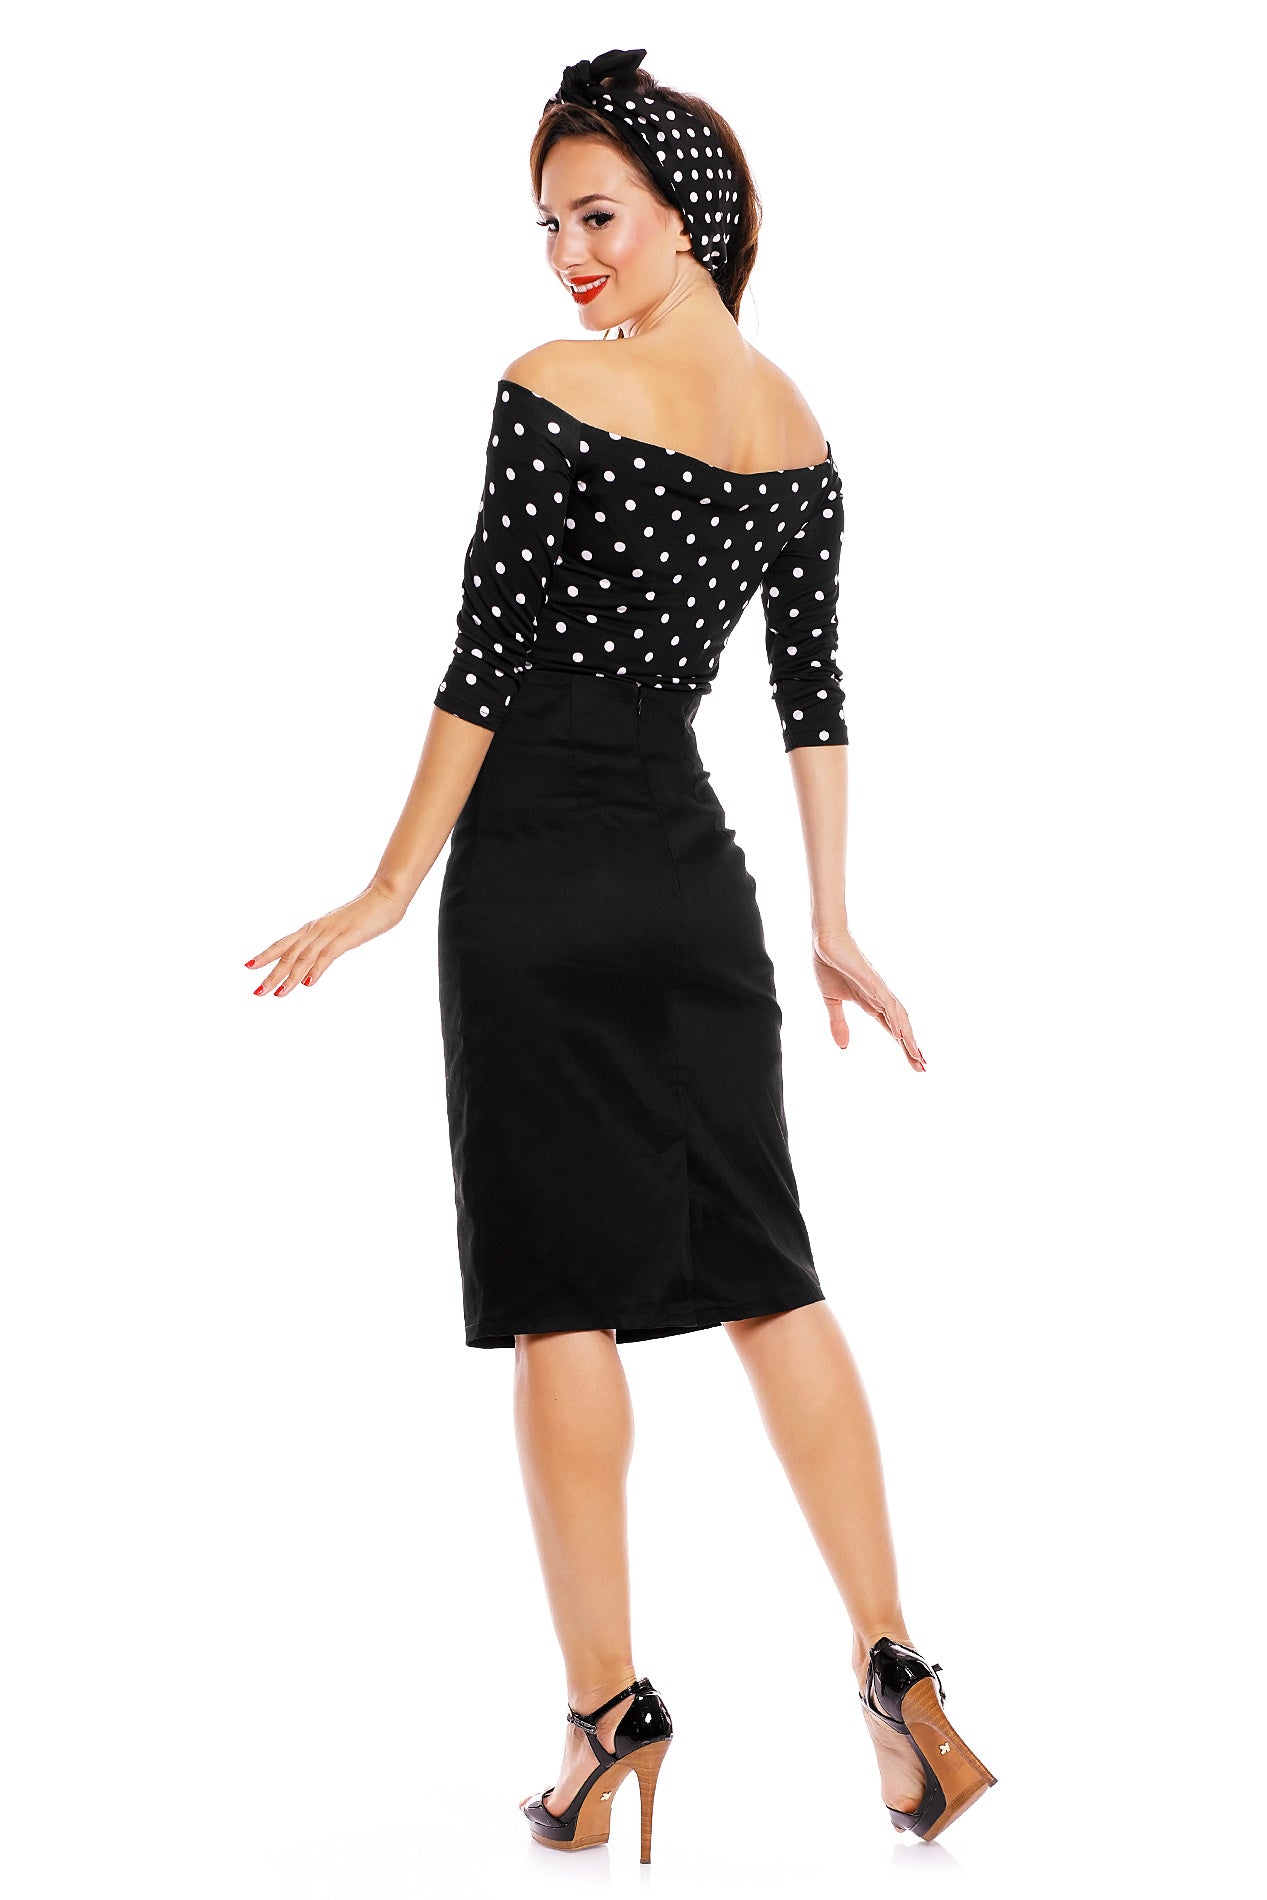 Model wearing our Gloria off-shoulder Top in Black/White polka dot print, with matching headband and skirt back view